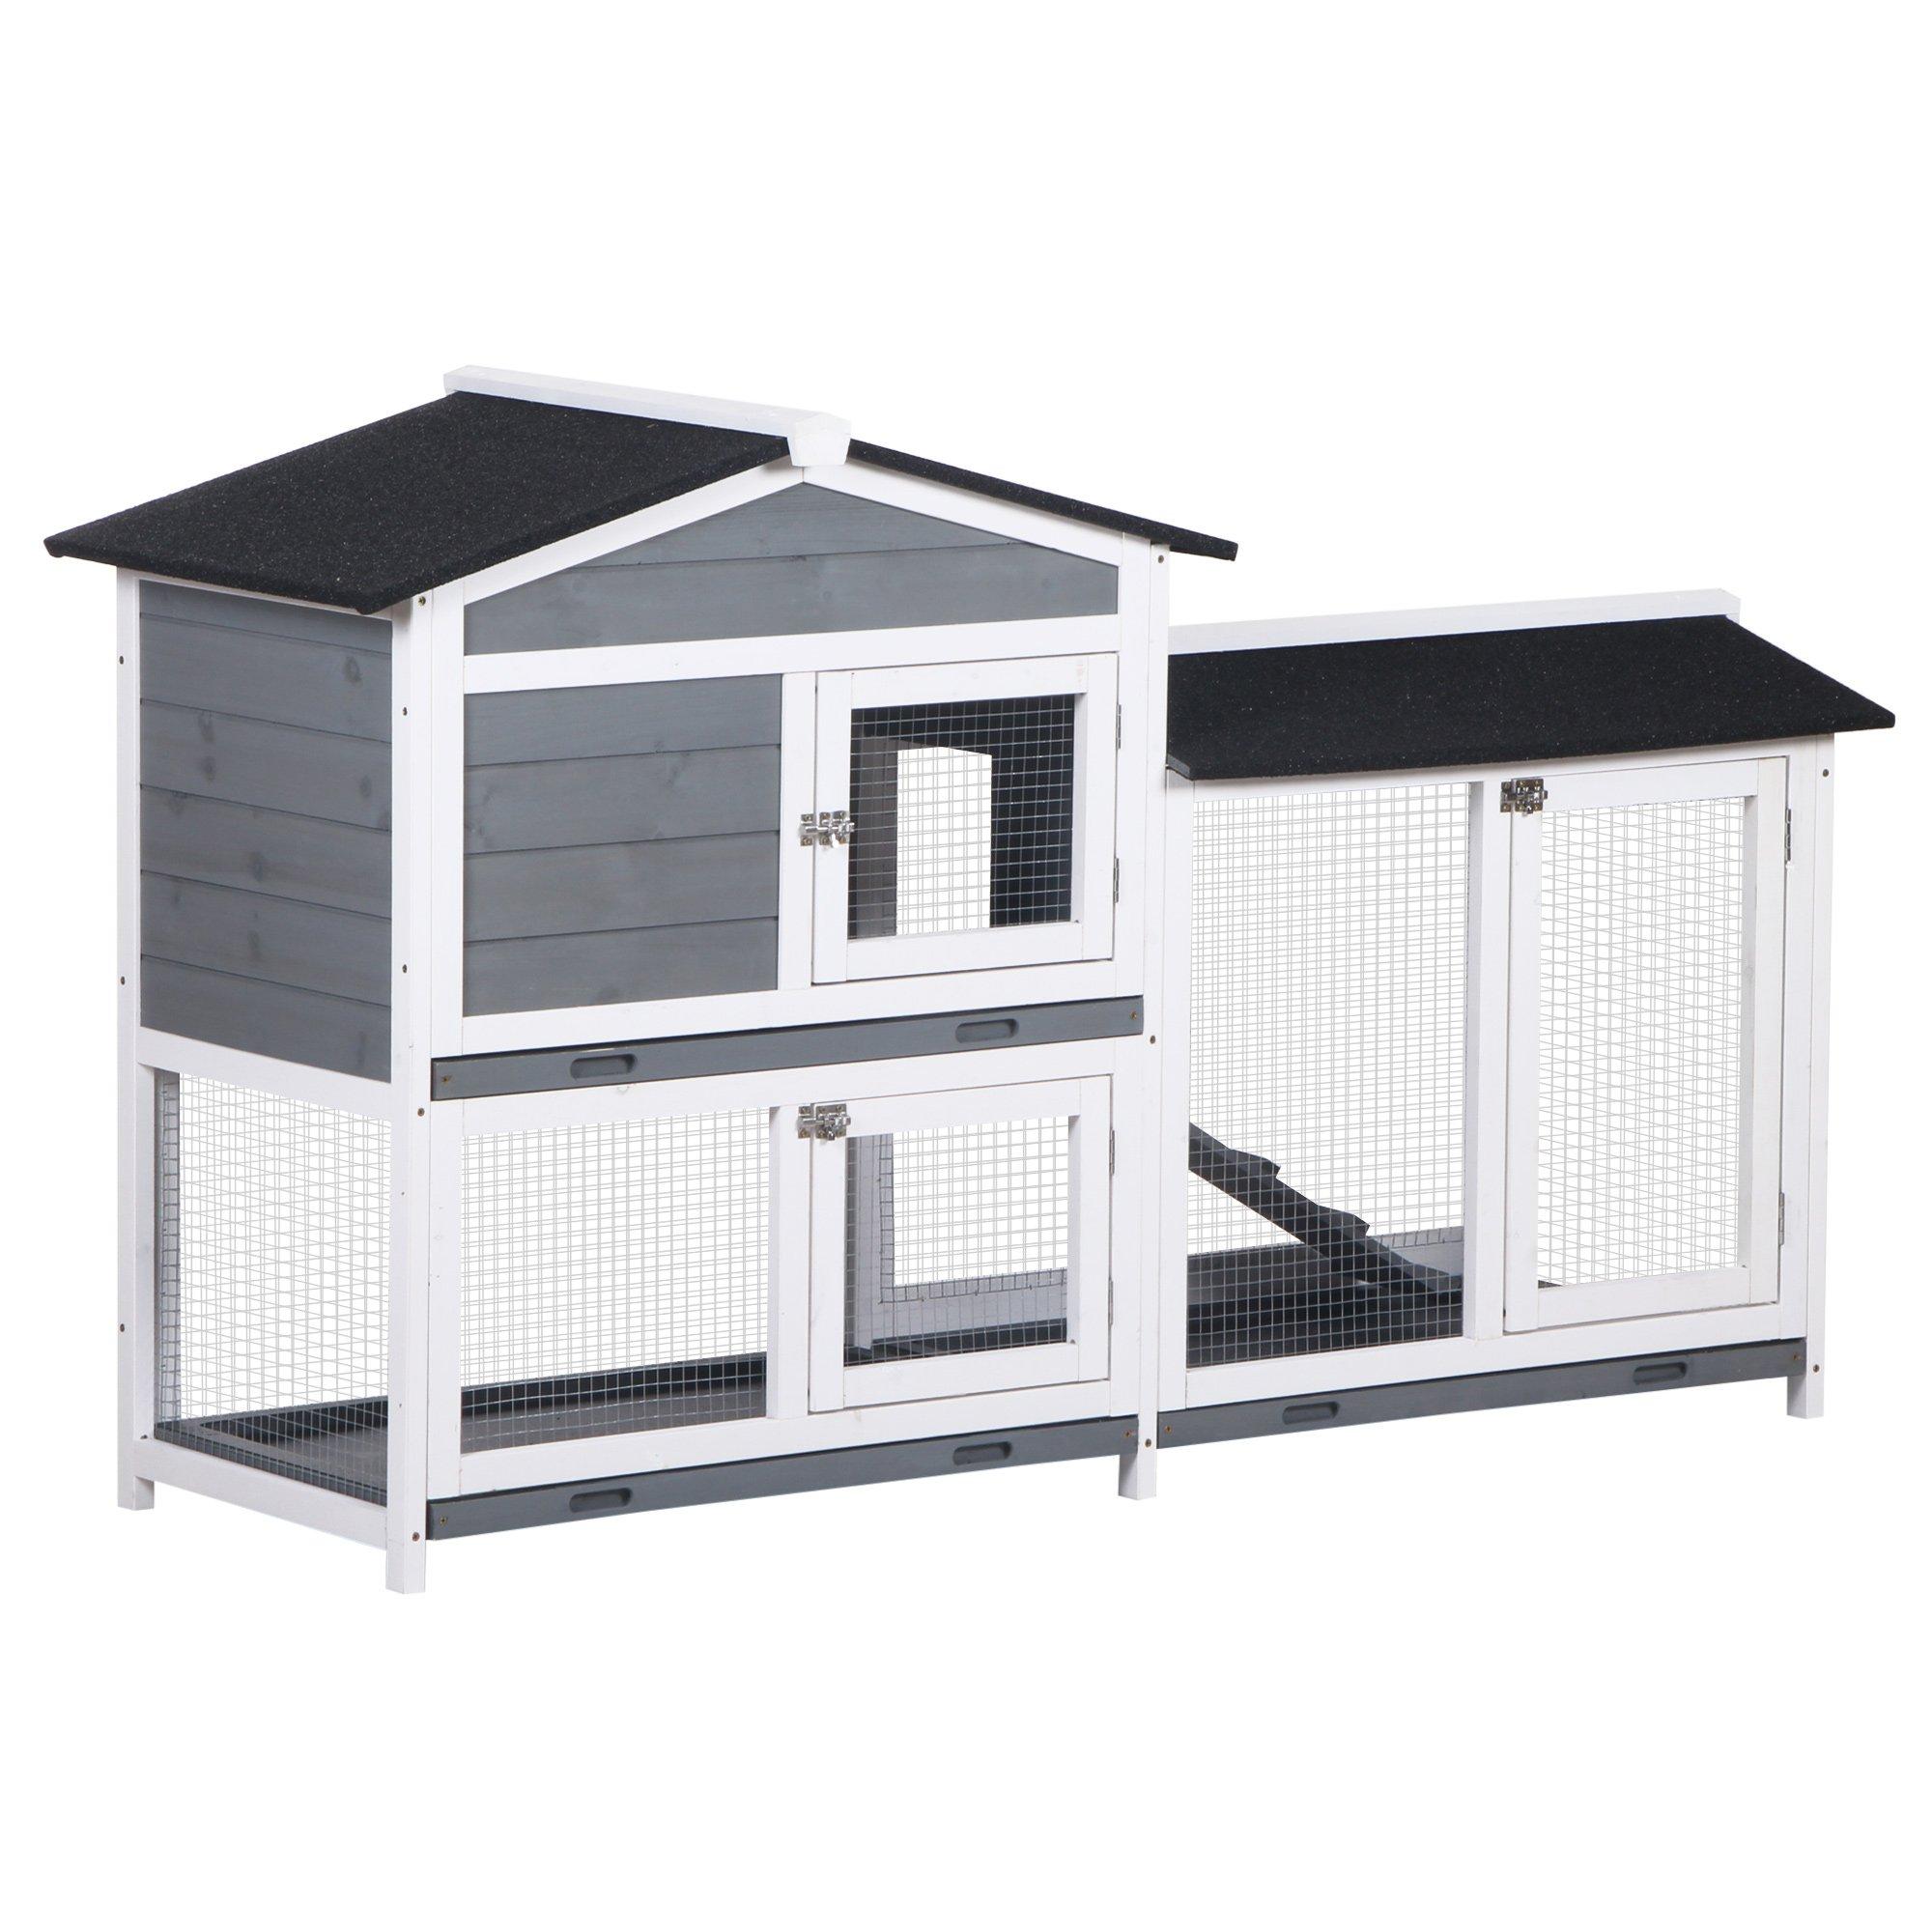 2-Tier Wooden Rabbit Hutch Guinea Pig House Pet Cage Outdoor w/ Tray Ramp